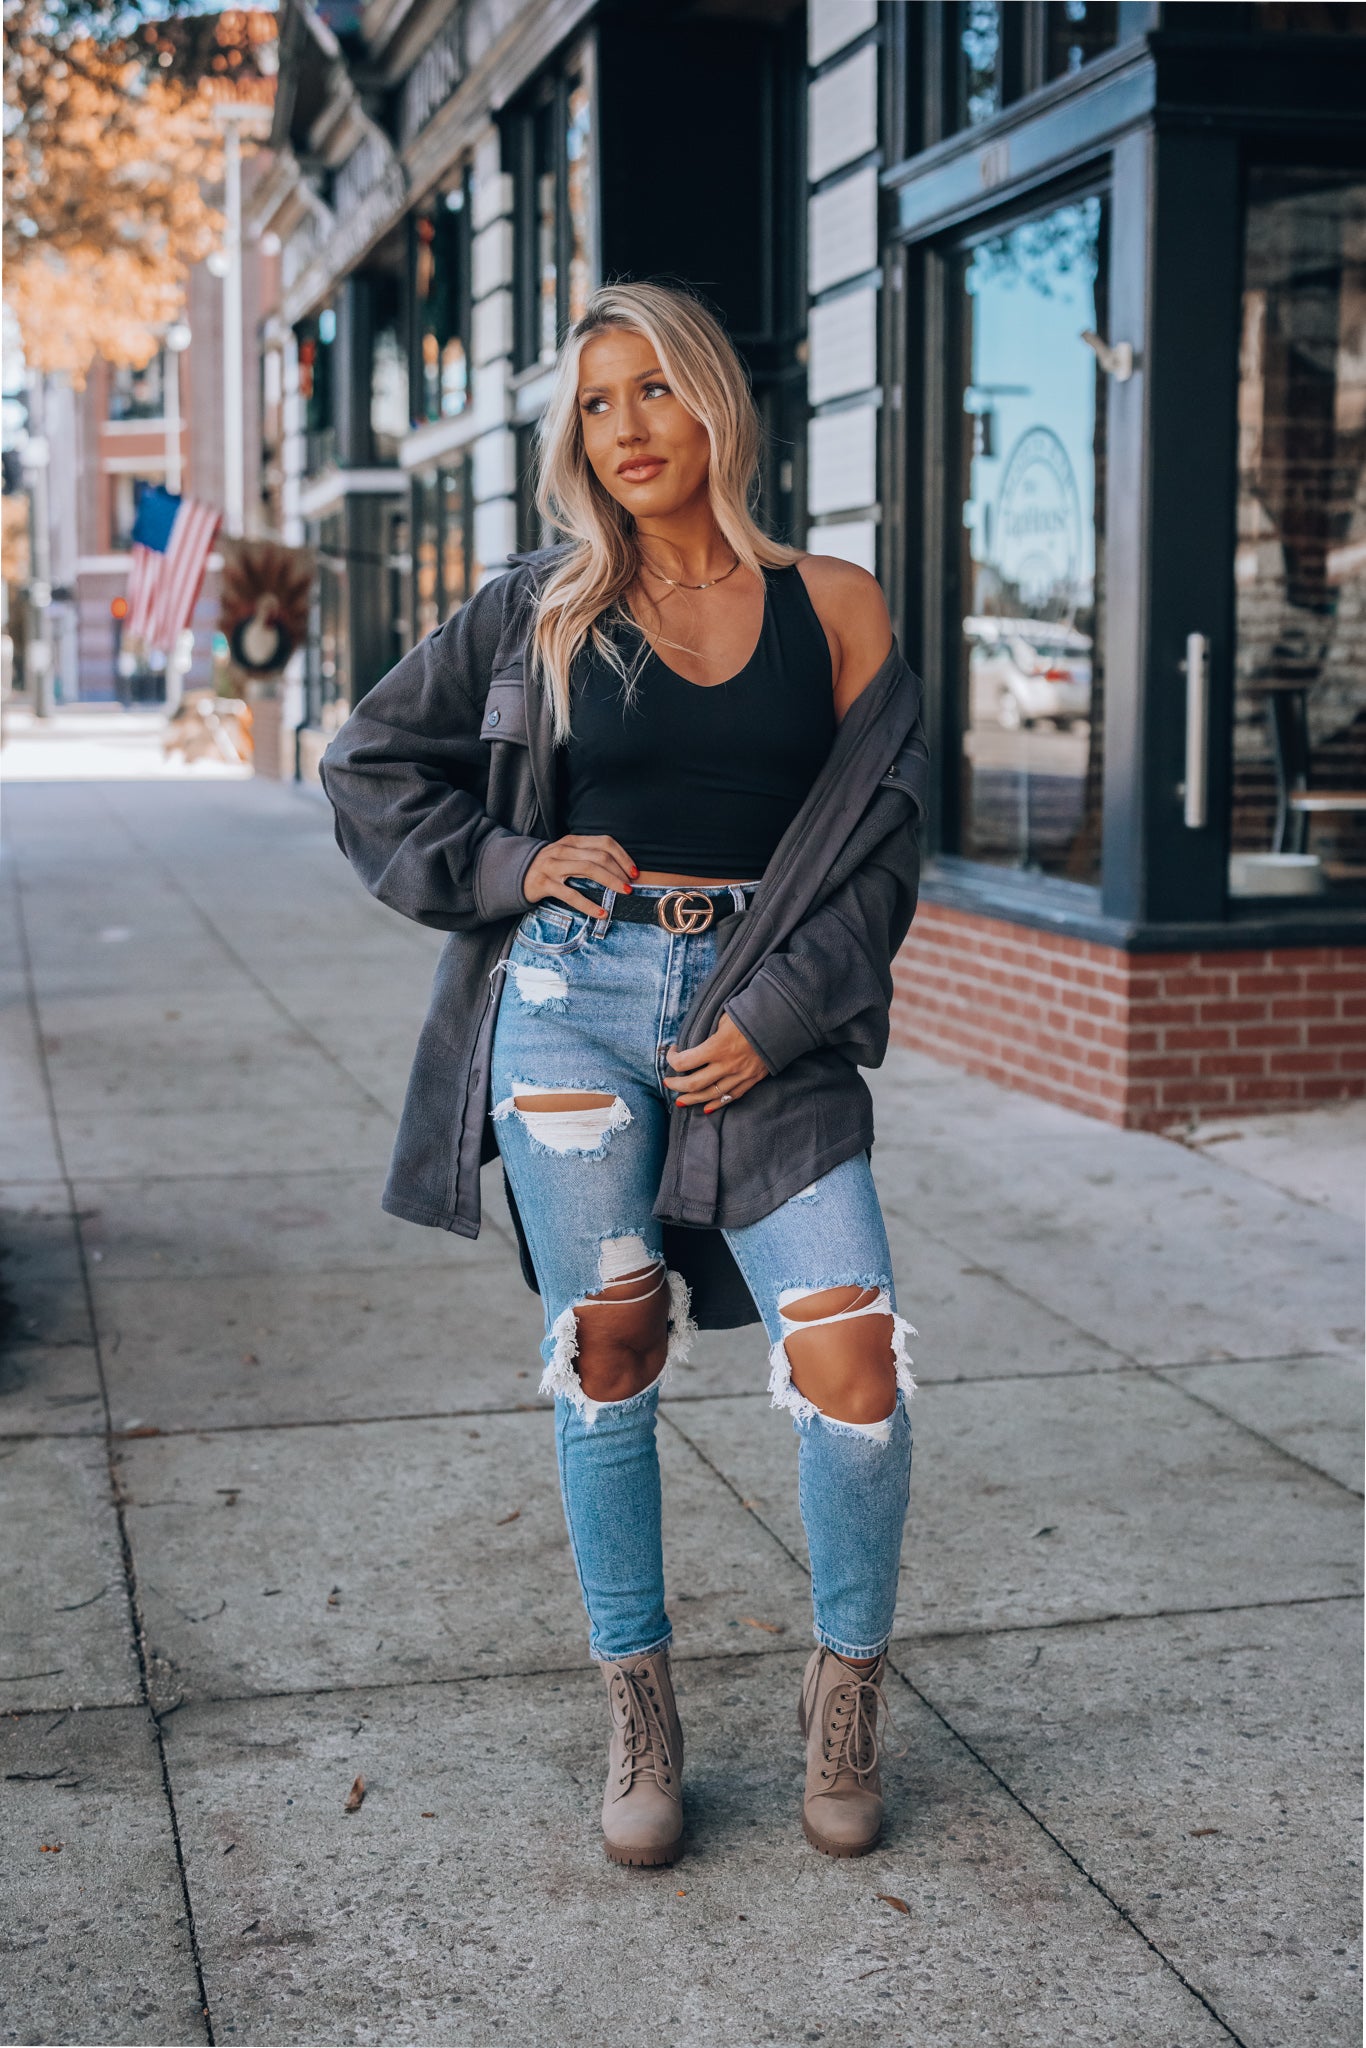 Glow Up Distressed Jeans